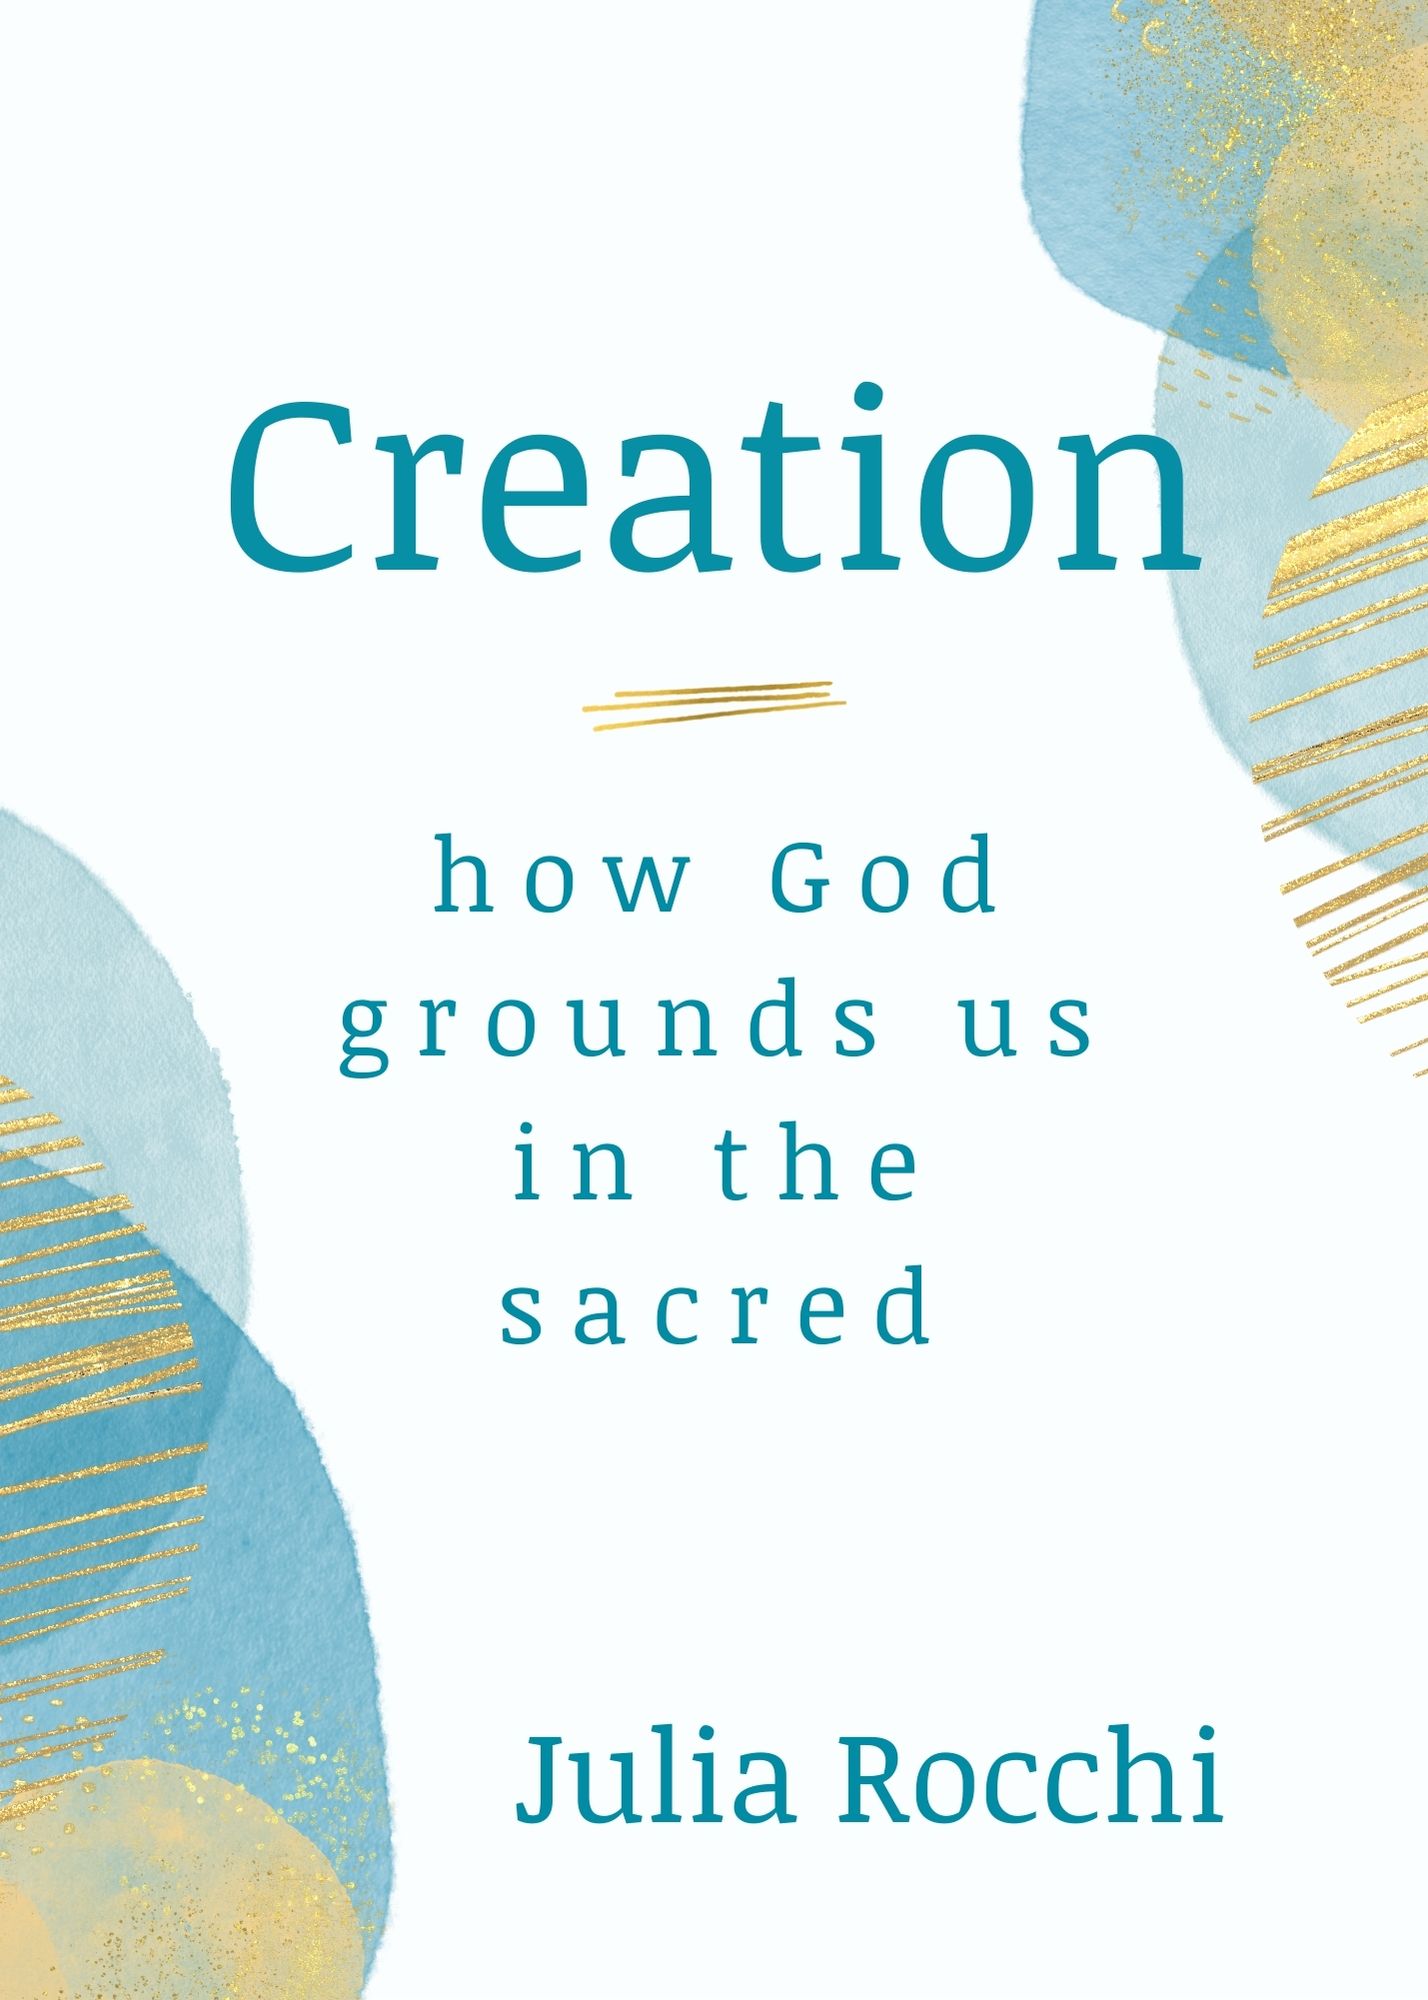 Cover Image of Creation by Julia Rocchi